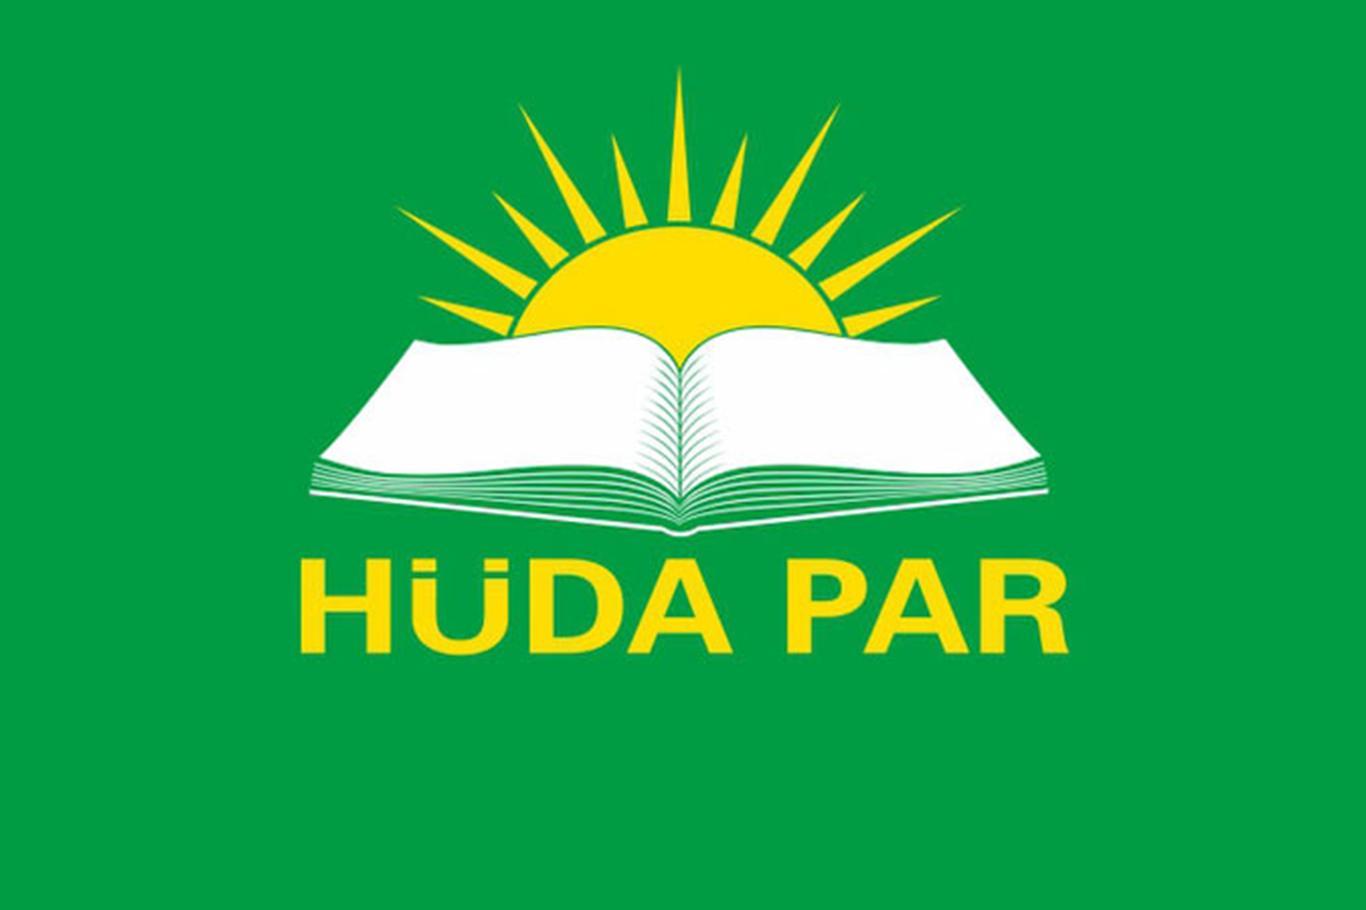 HÜDA PAR: There is a need for policies that would ensure unity among Muslims